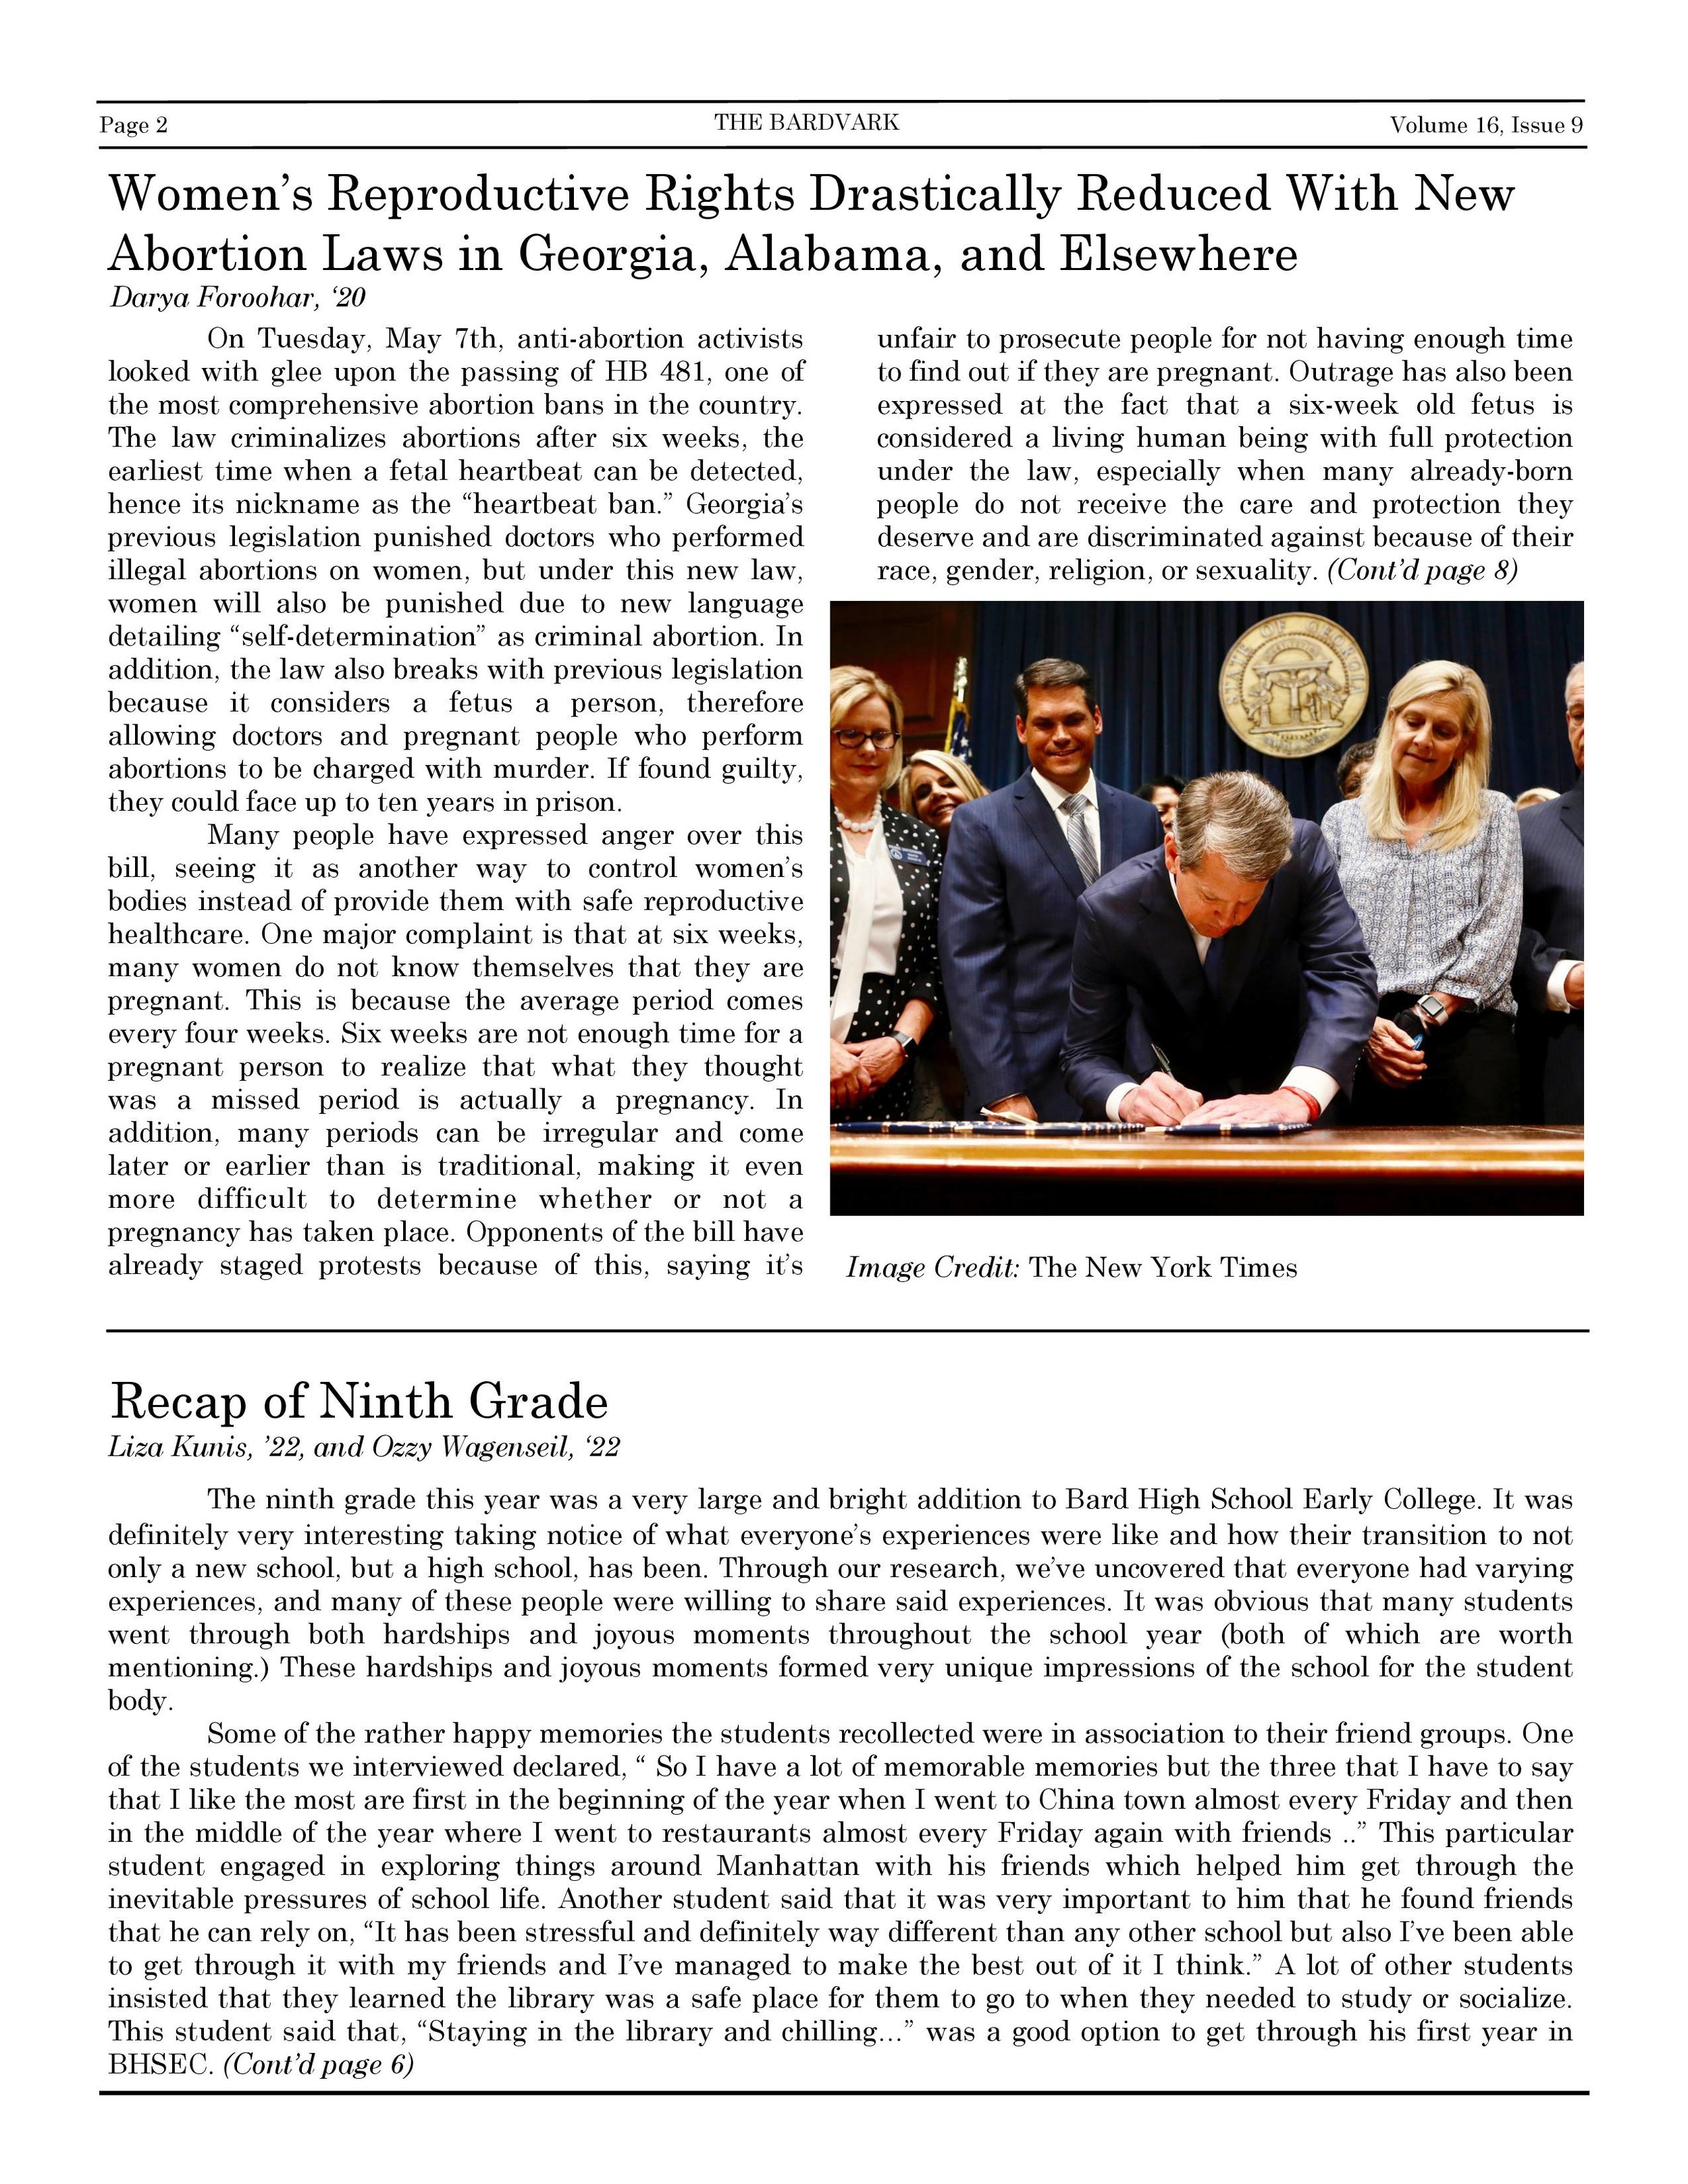 Issue 9 May 2019-2.jpg